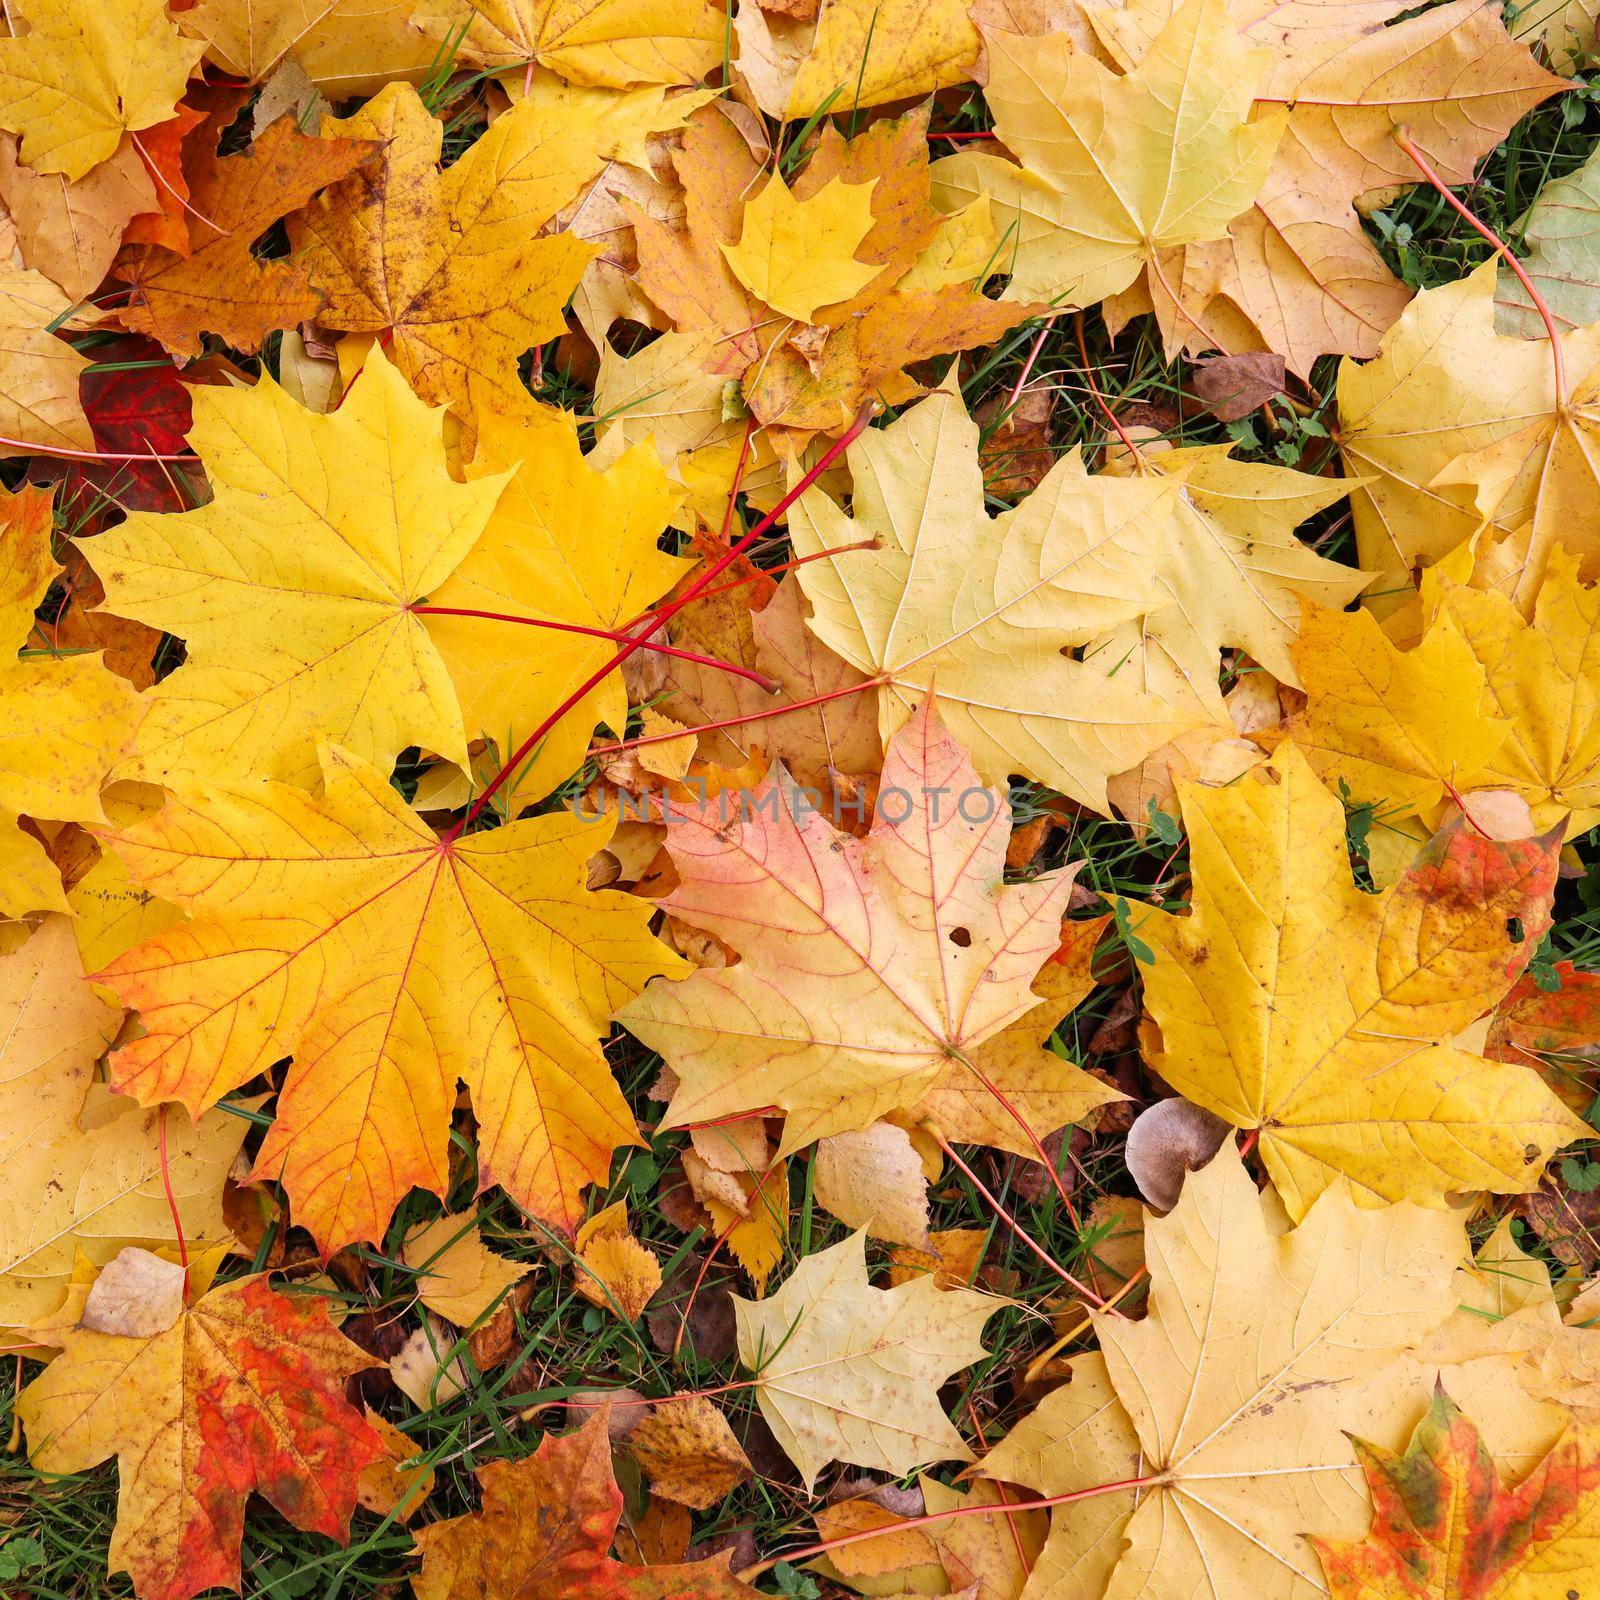 Fallen yellow maple leaves in autumn. Nature background